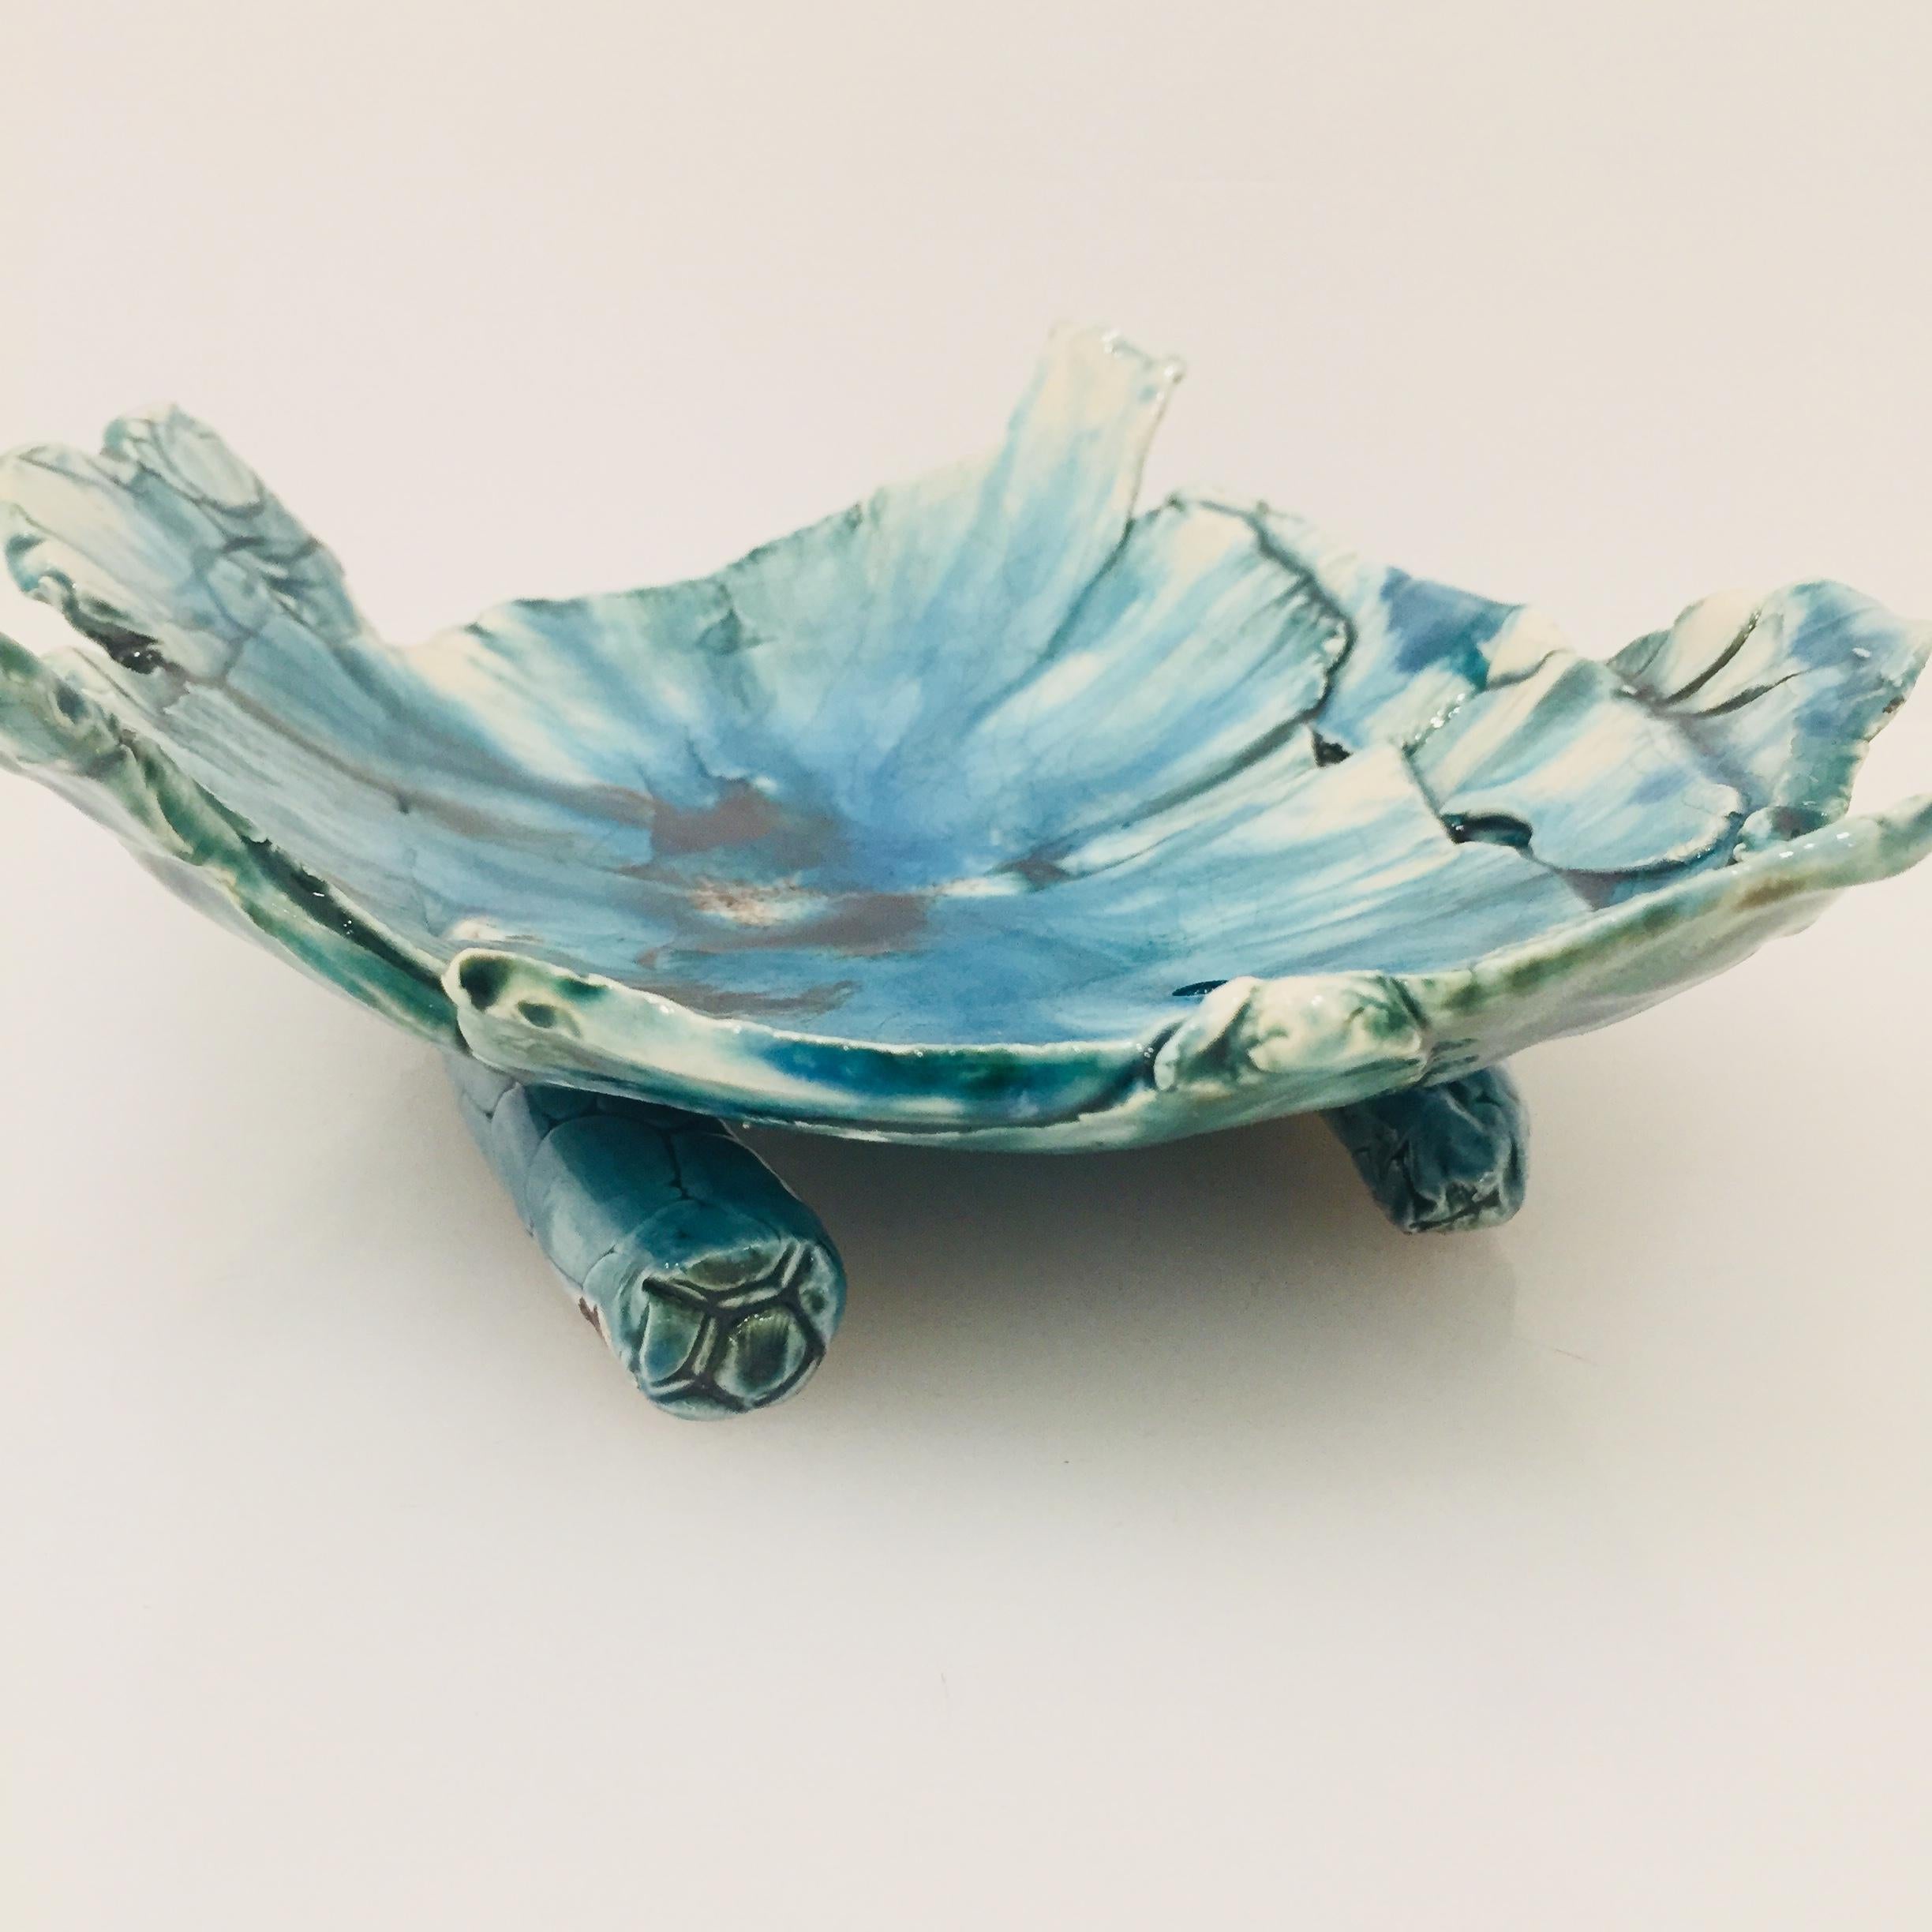 American Contemporary Ceramic Bowl by Stacey H. Hammond